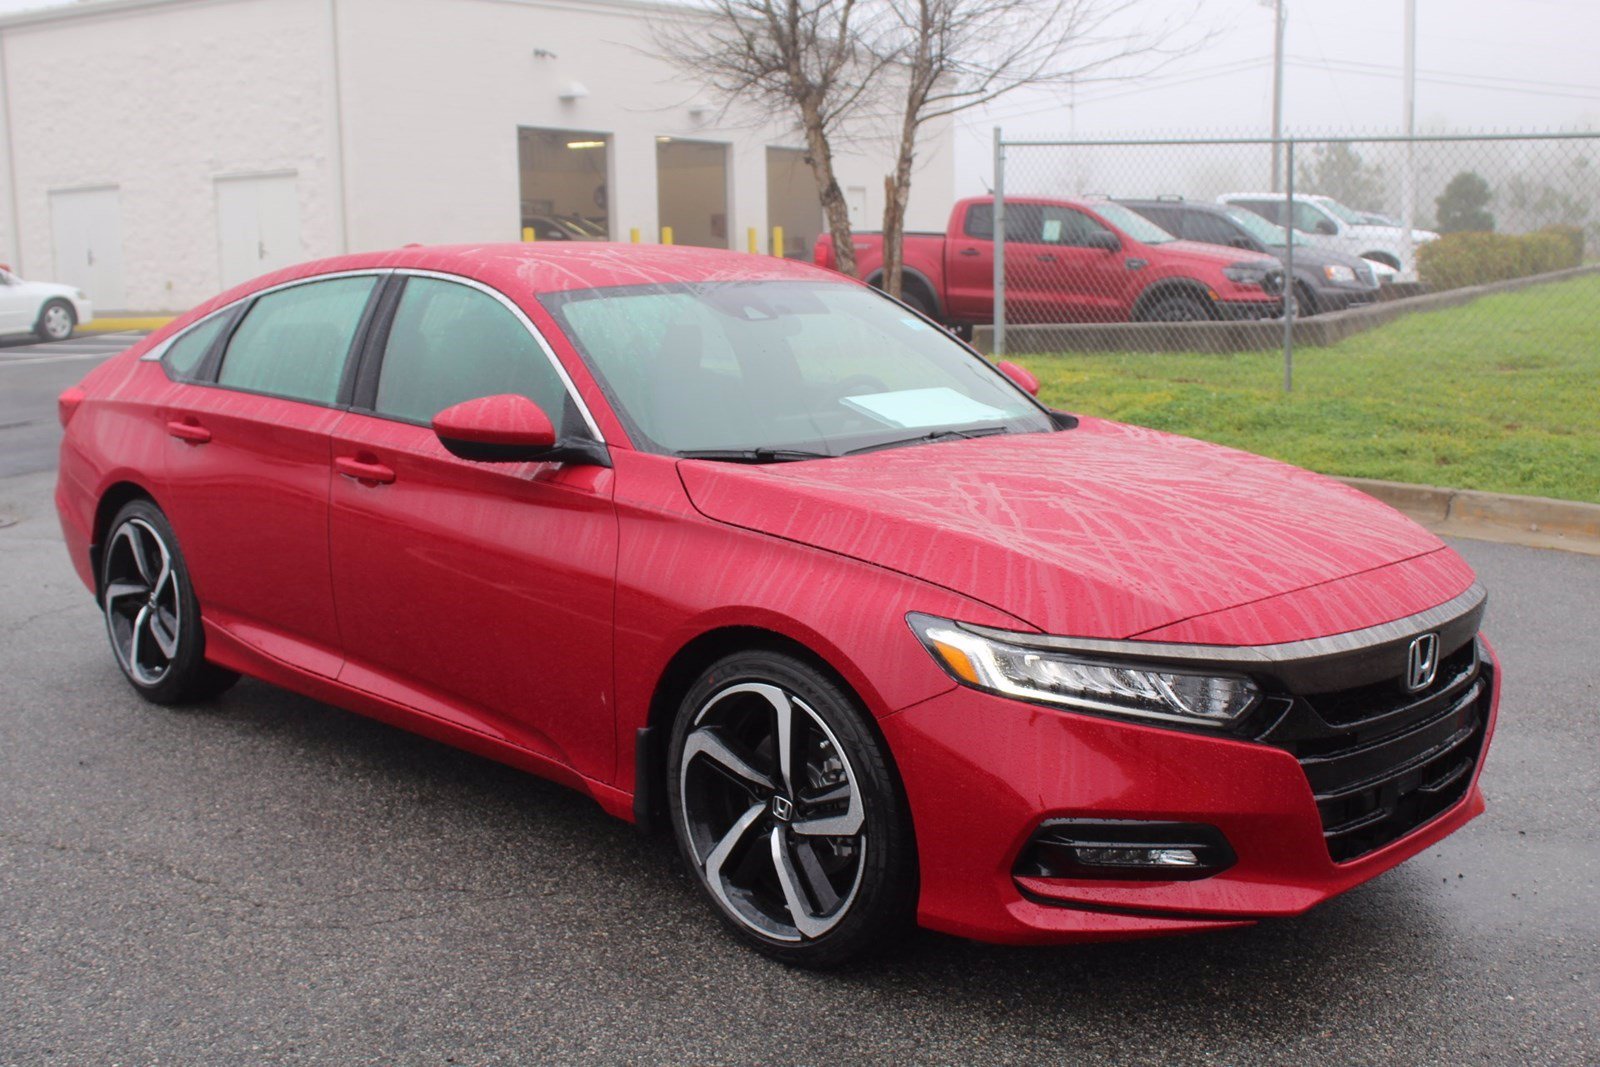 New 2020 Honda Accord Sport 1.5T 4dr Car in Milledgeville #H20204